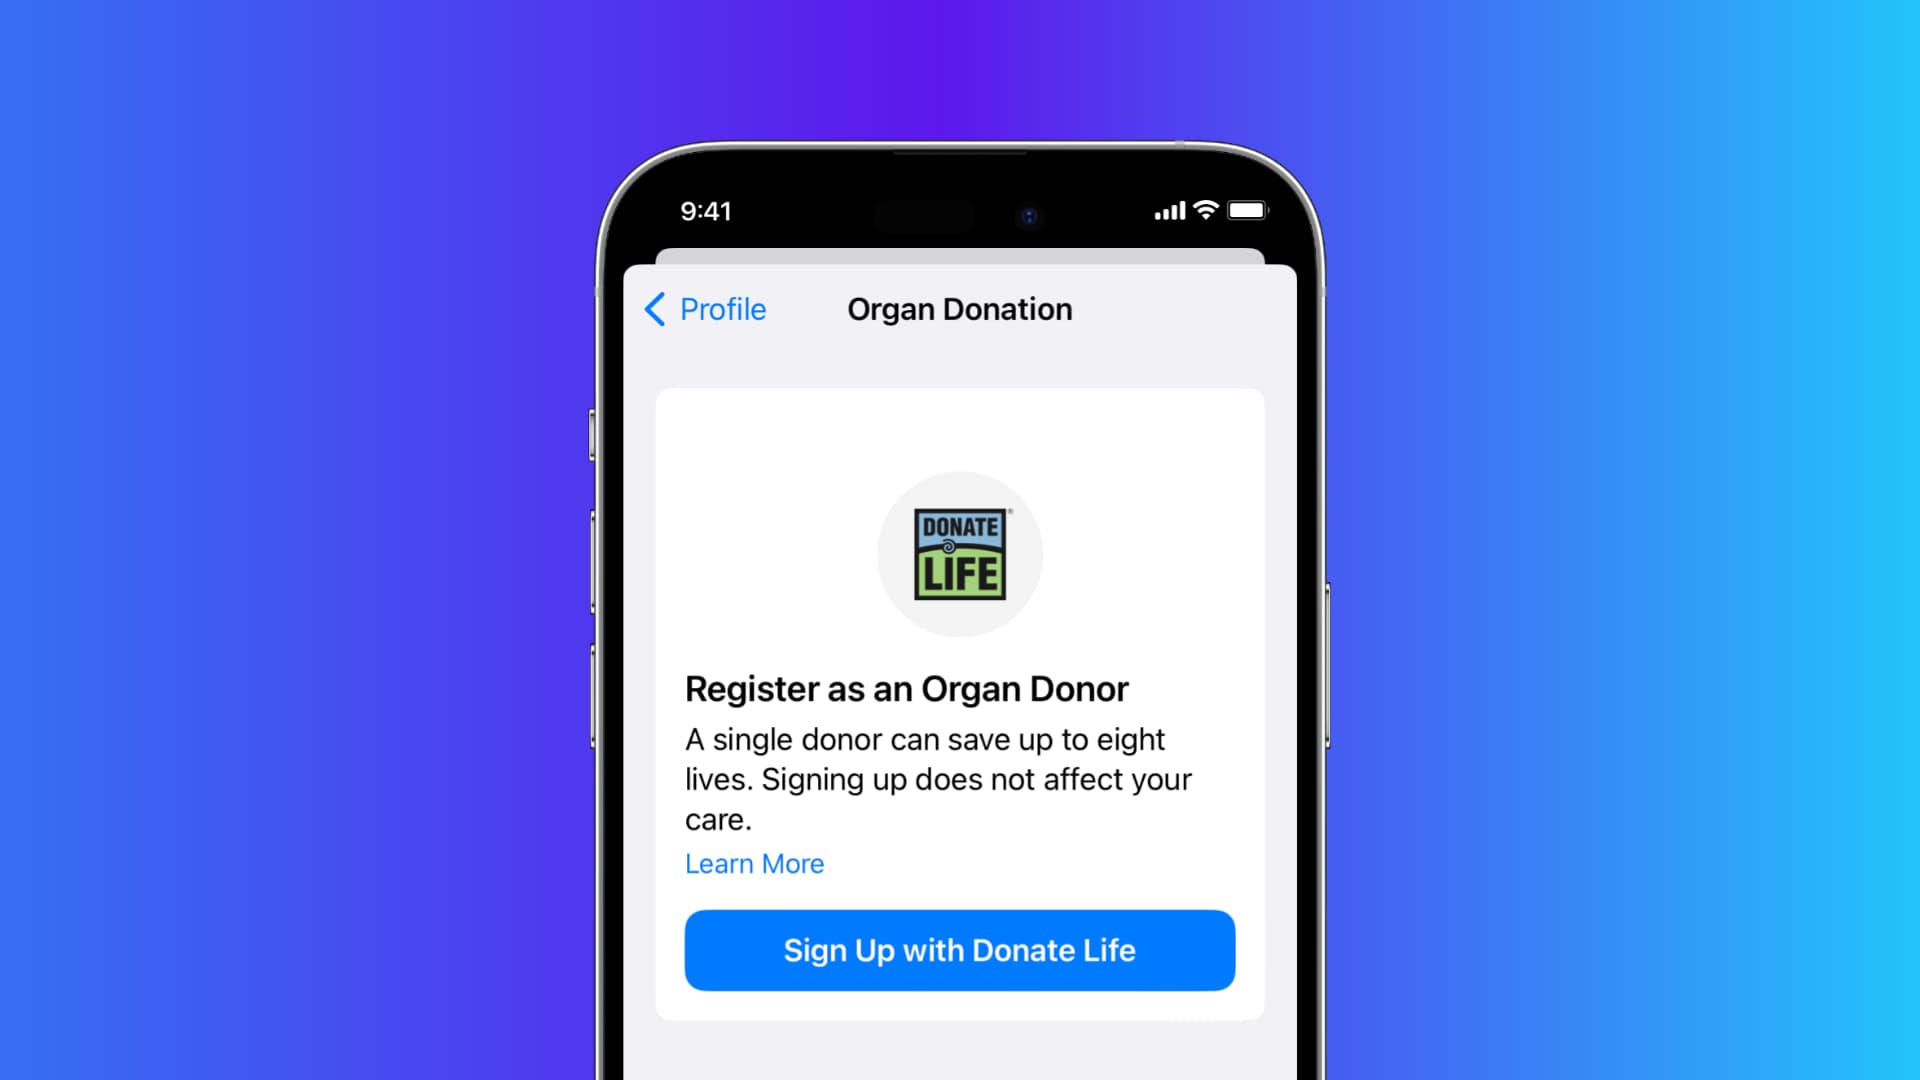 Register for Organ donation on your iPhone